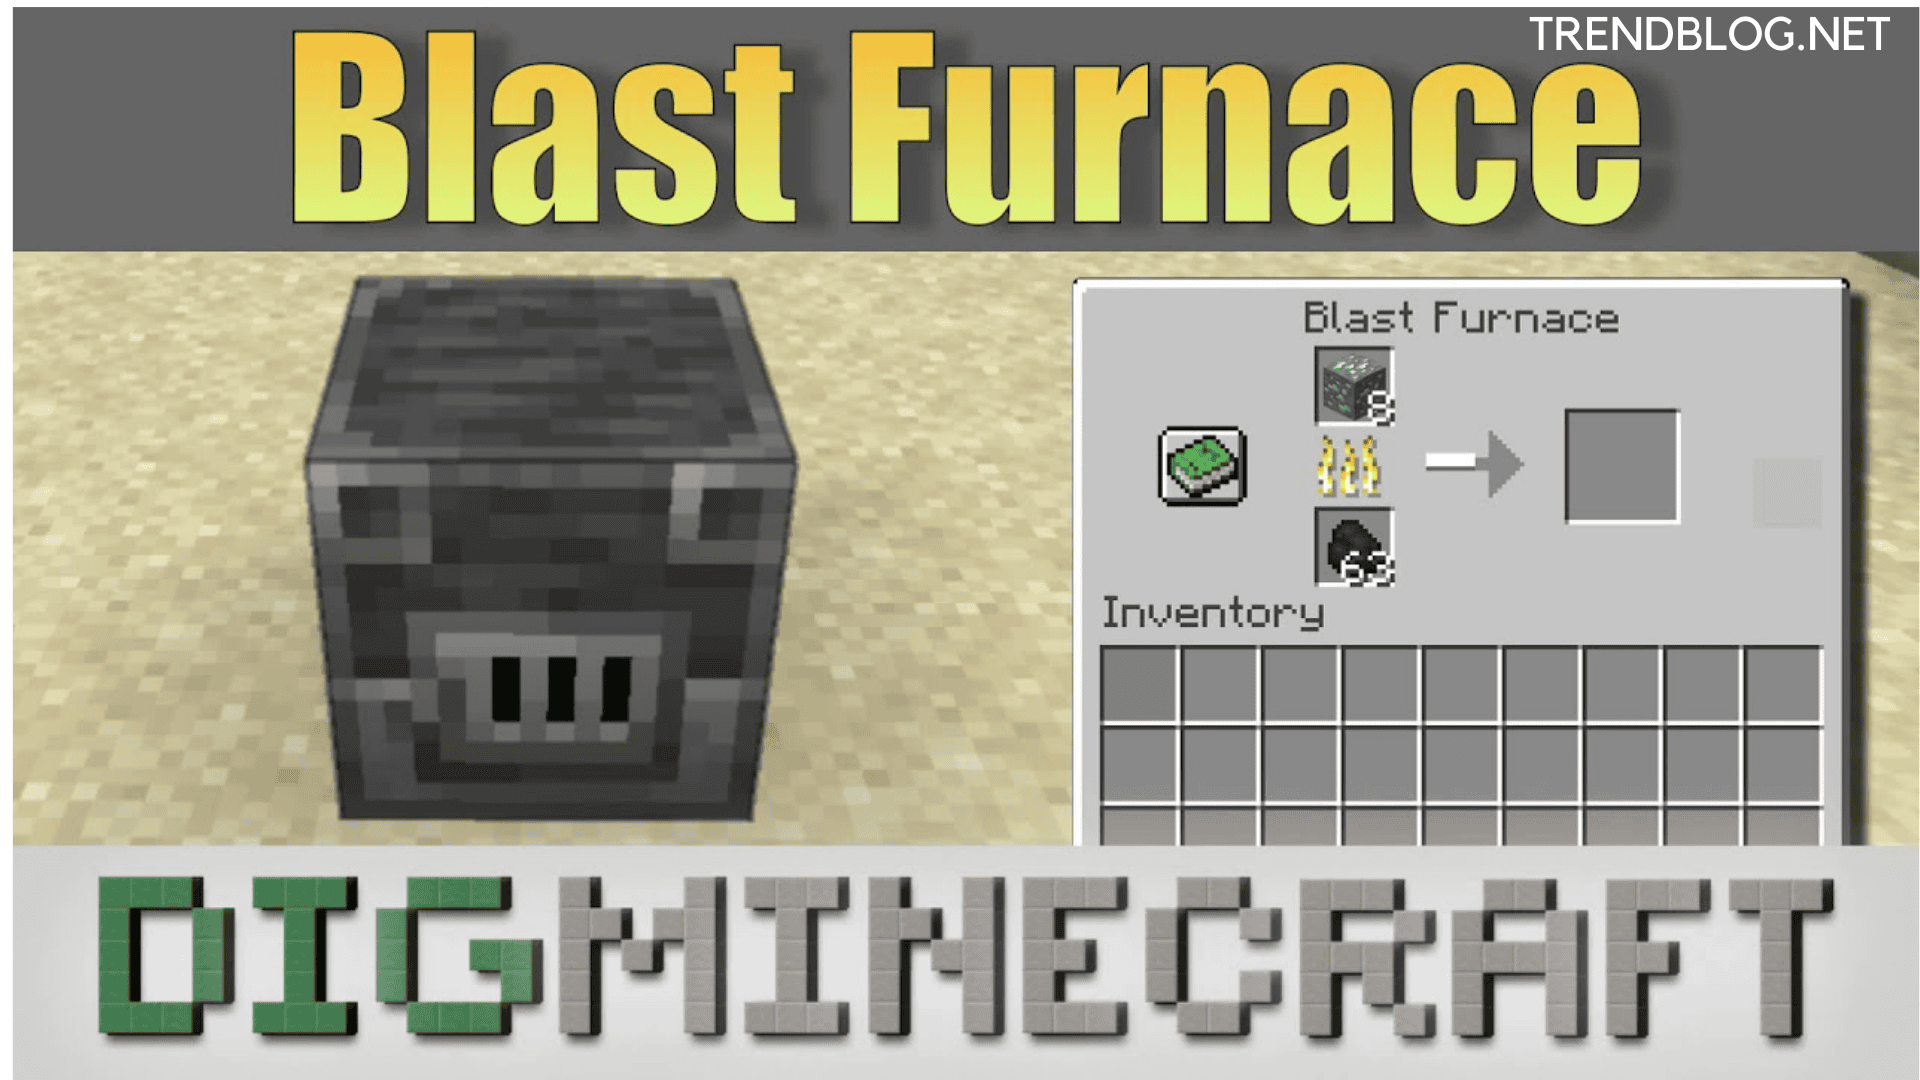  How to Make a Blast Furnace in Minecraft Quickly